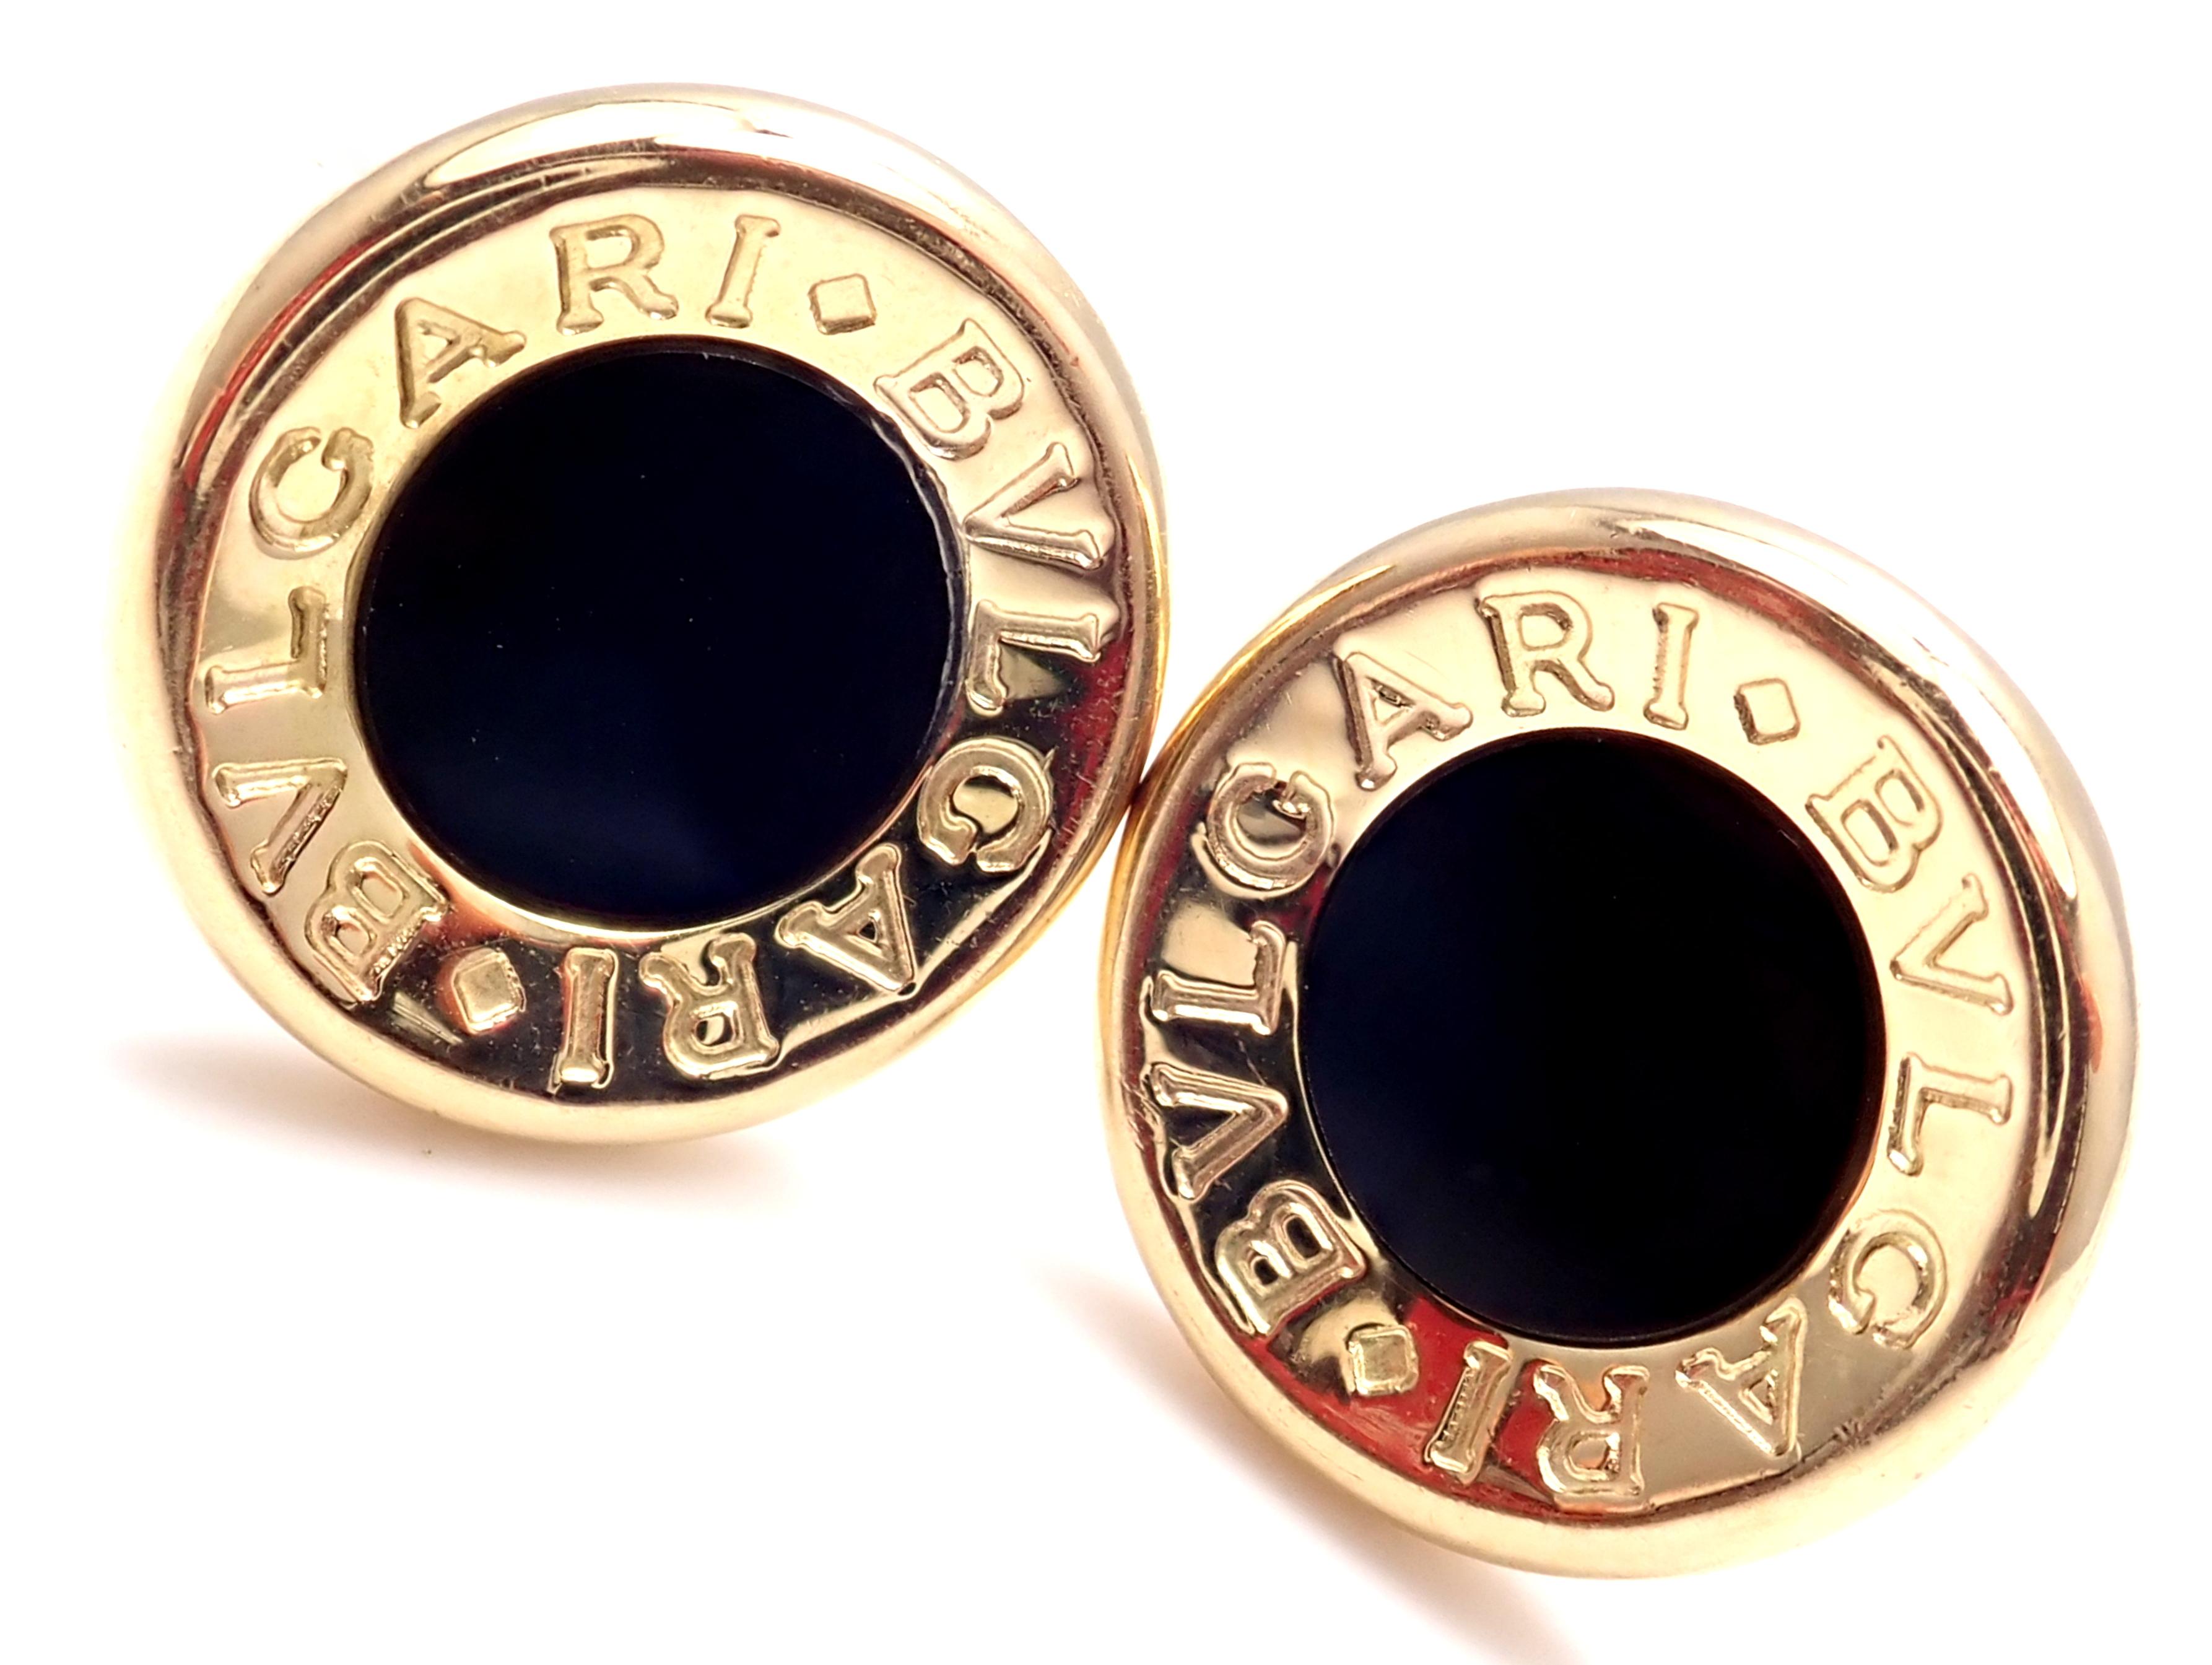 18k Yellow Gold Black Onyx Cufflinks by Bulgari. 
With 2 Black Onyx stones.
Details: 
Measurements: 17mm x 29mm
Weight: 20.2 grams
Stamped Hallmarks: Bvlgari 750 Made in Italy
*Free Shipping within the United States*
YOUR PRICE: $2,500
T2064mmld